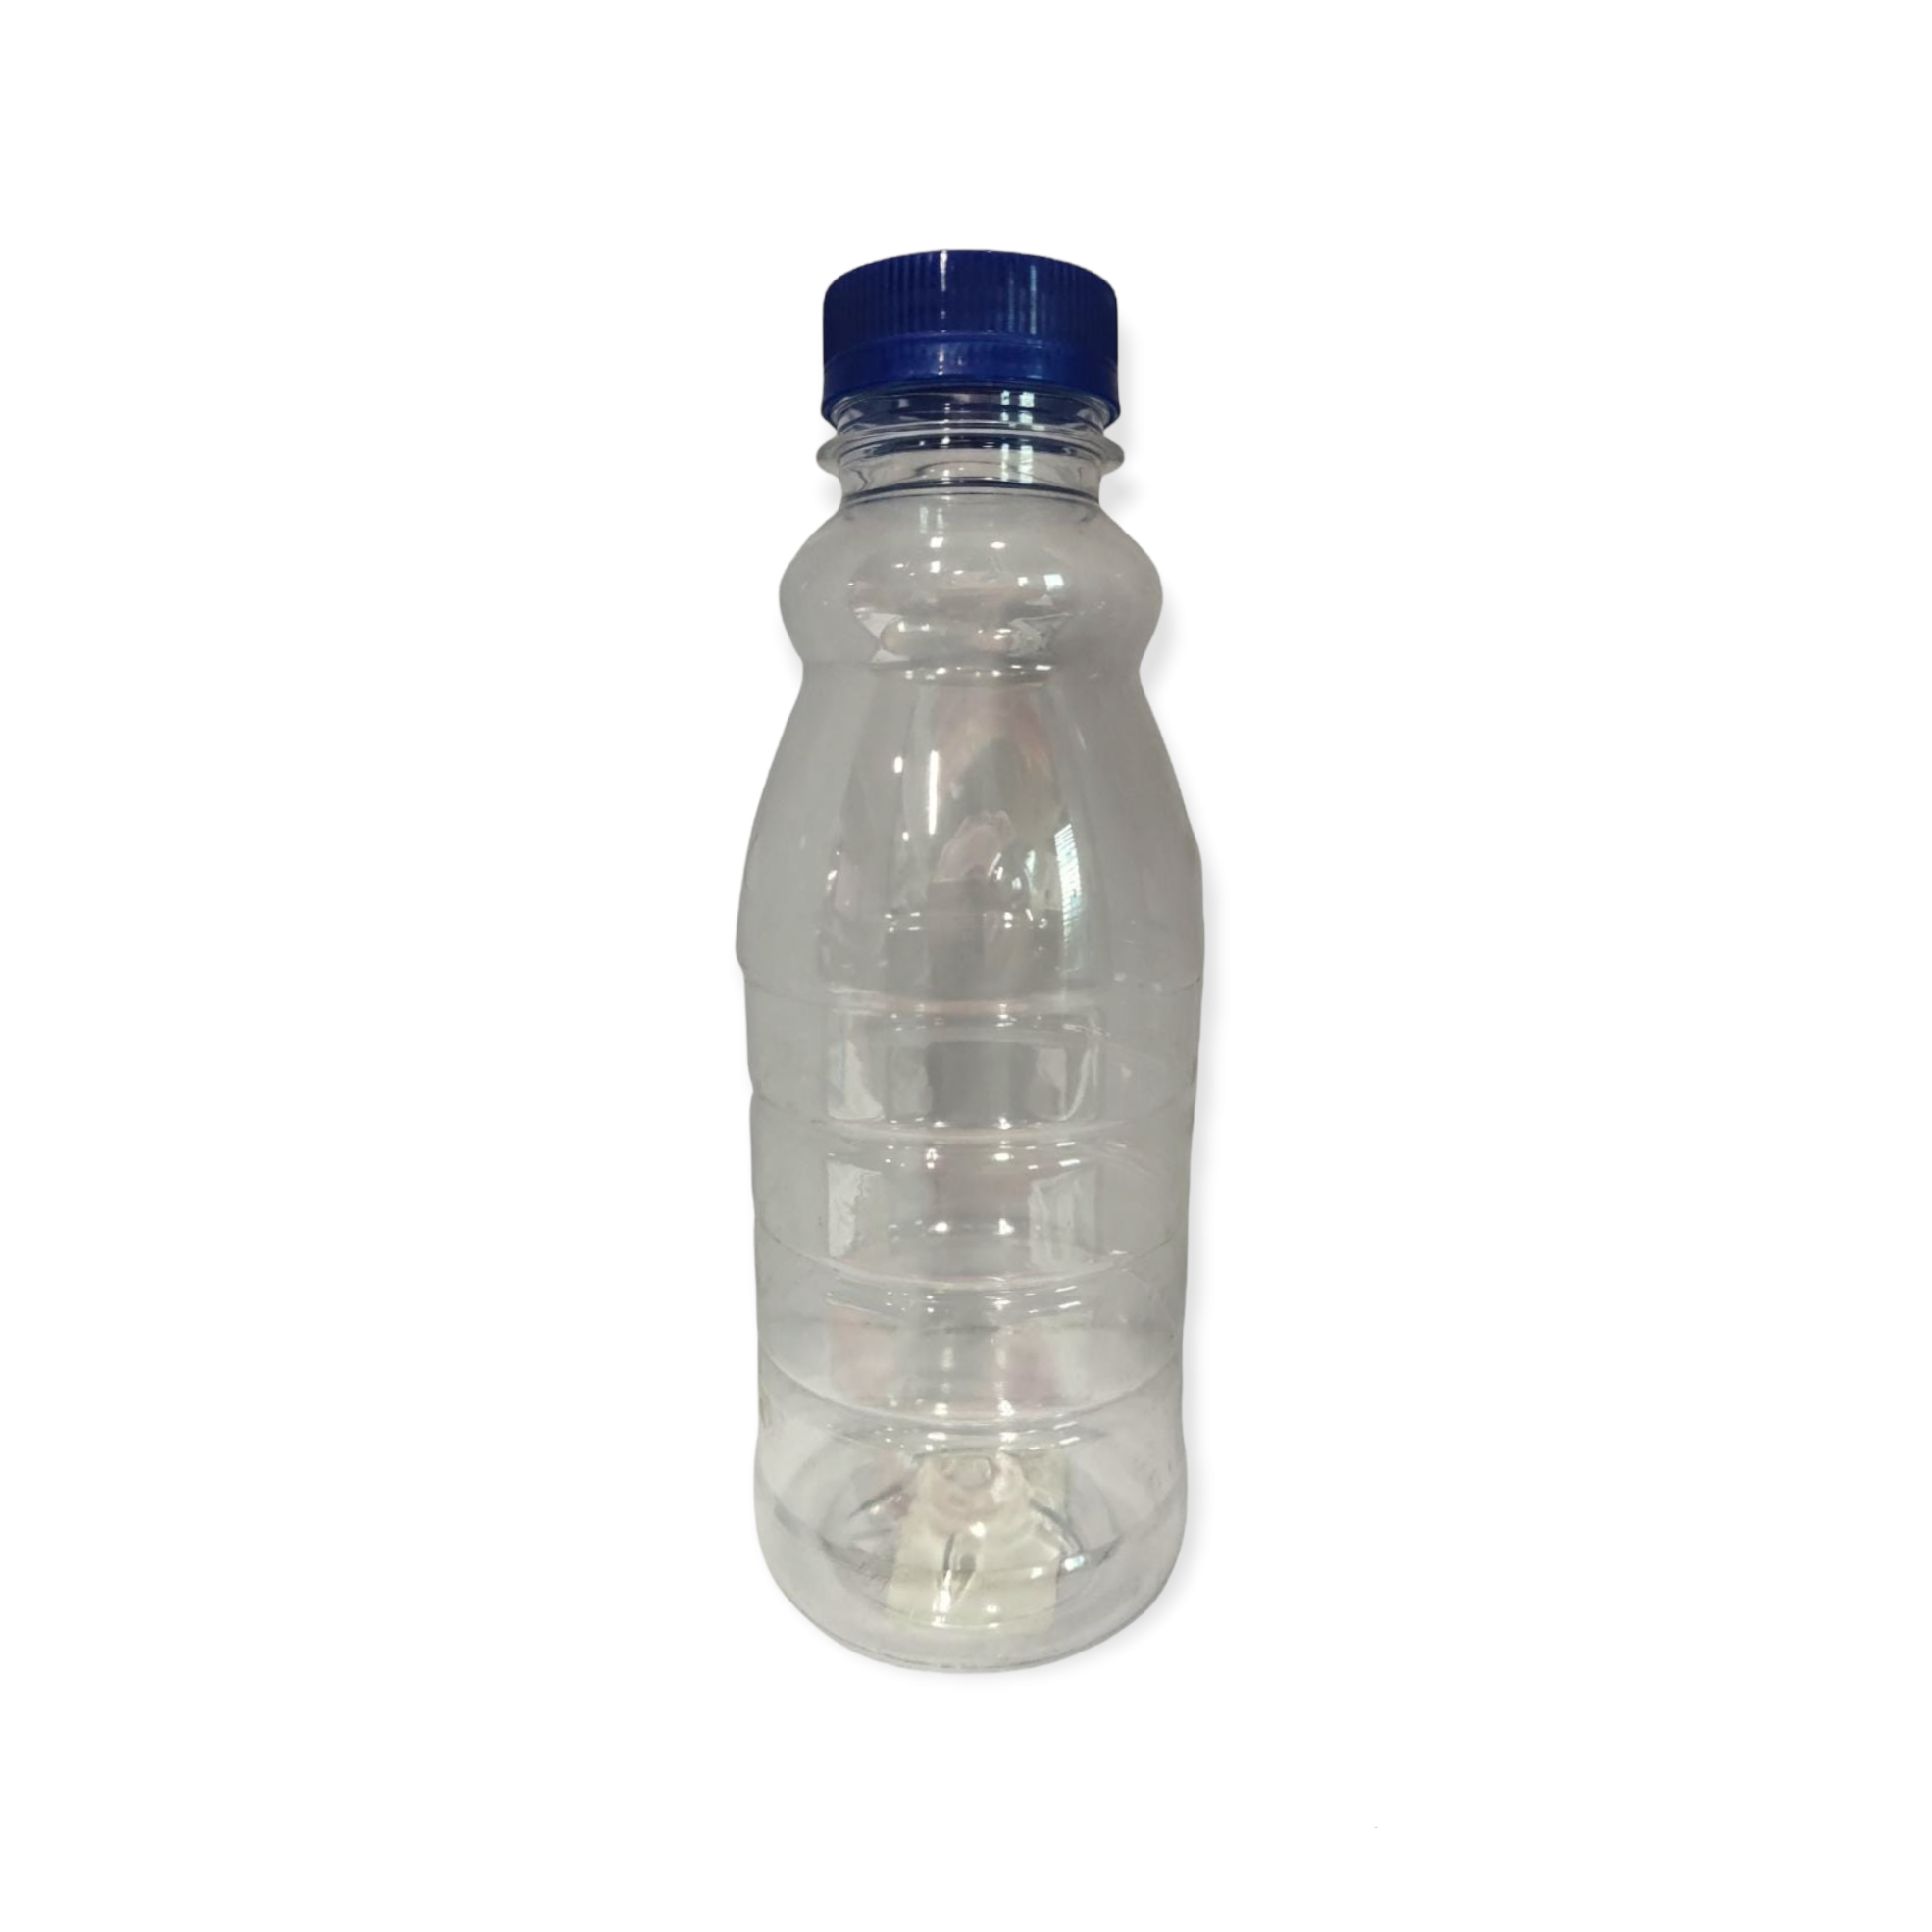 500ml Plastic Bottle Round Clear with Lid 10pack